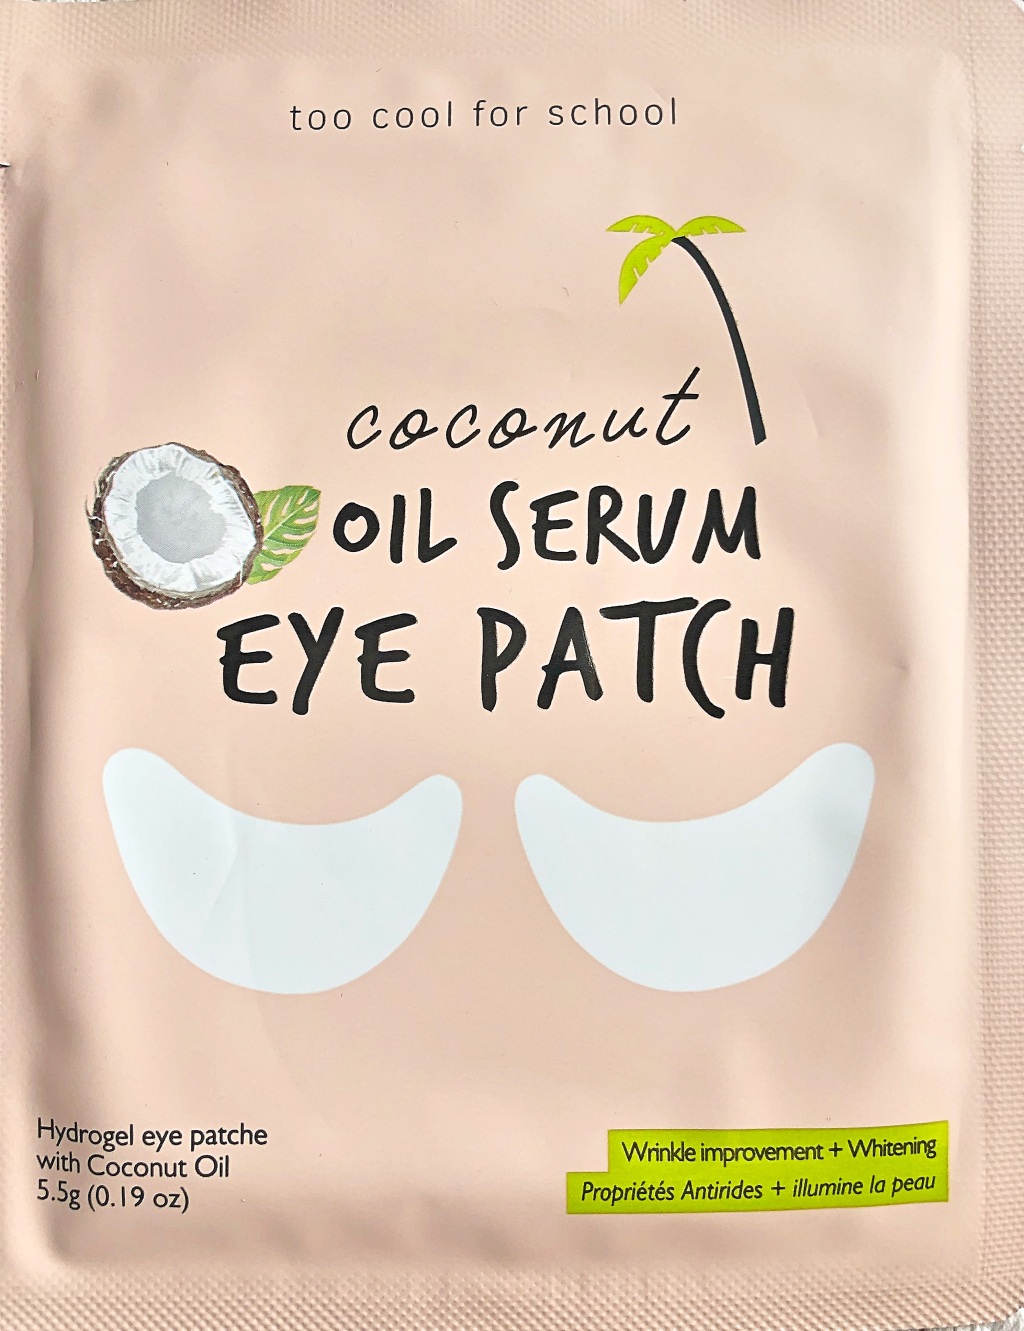 [Too cool for school] Coconut Oil Serum Eye Patch | #Mondaymask